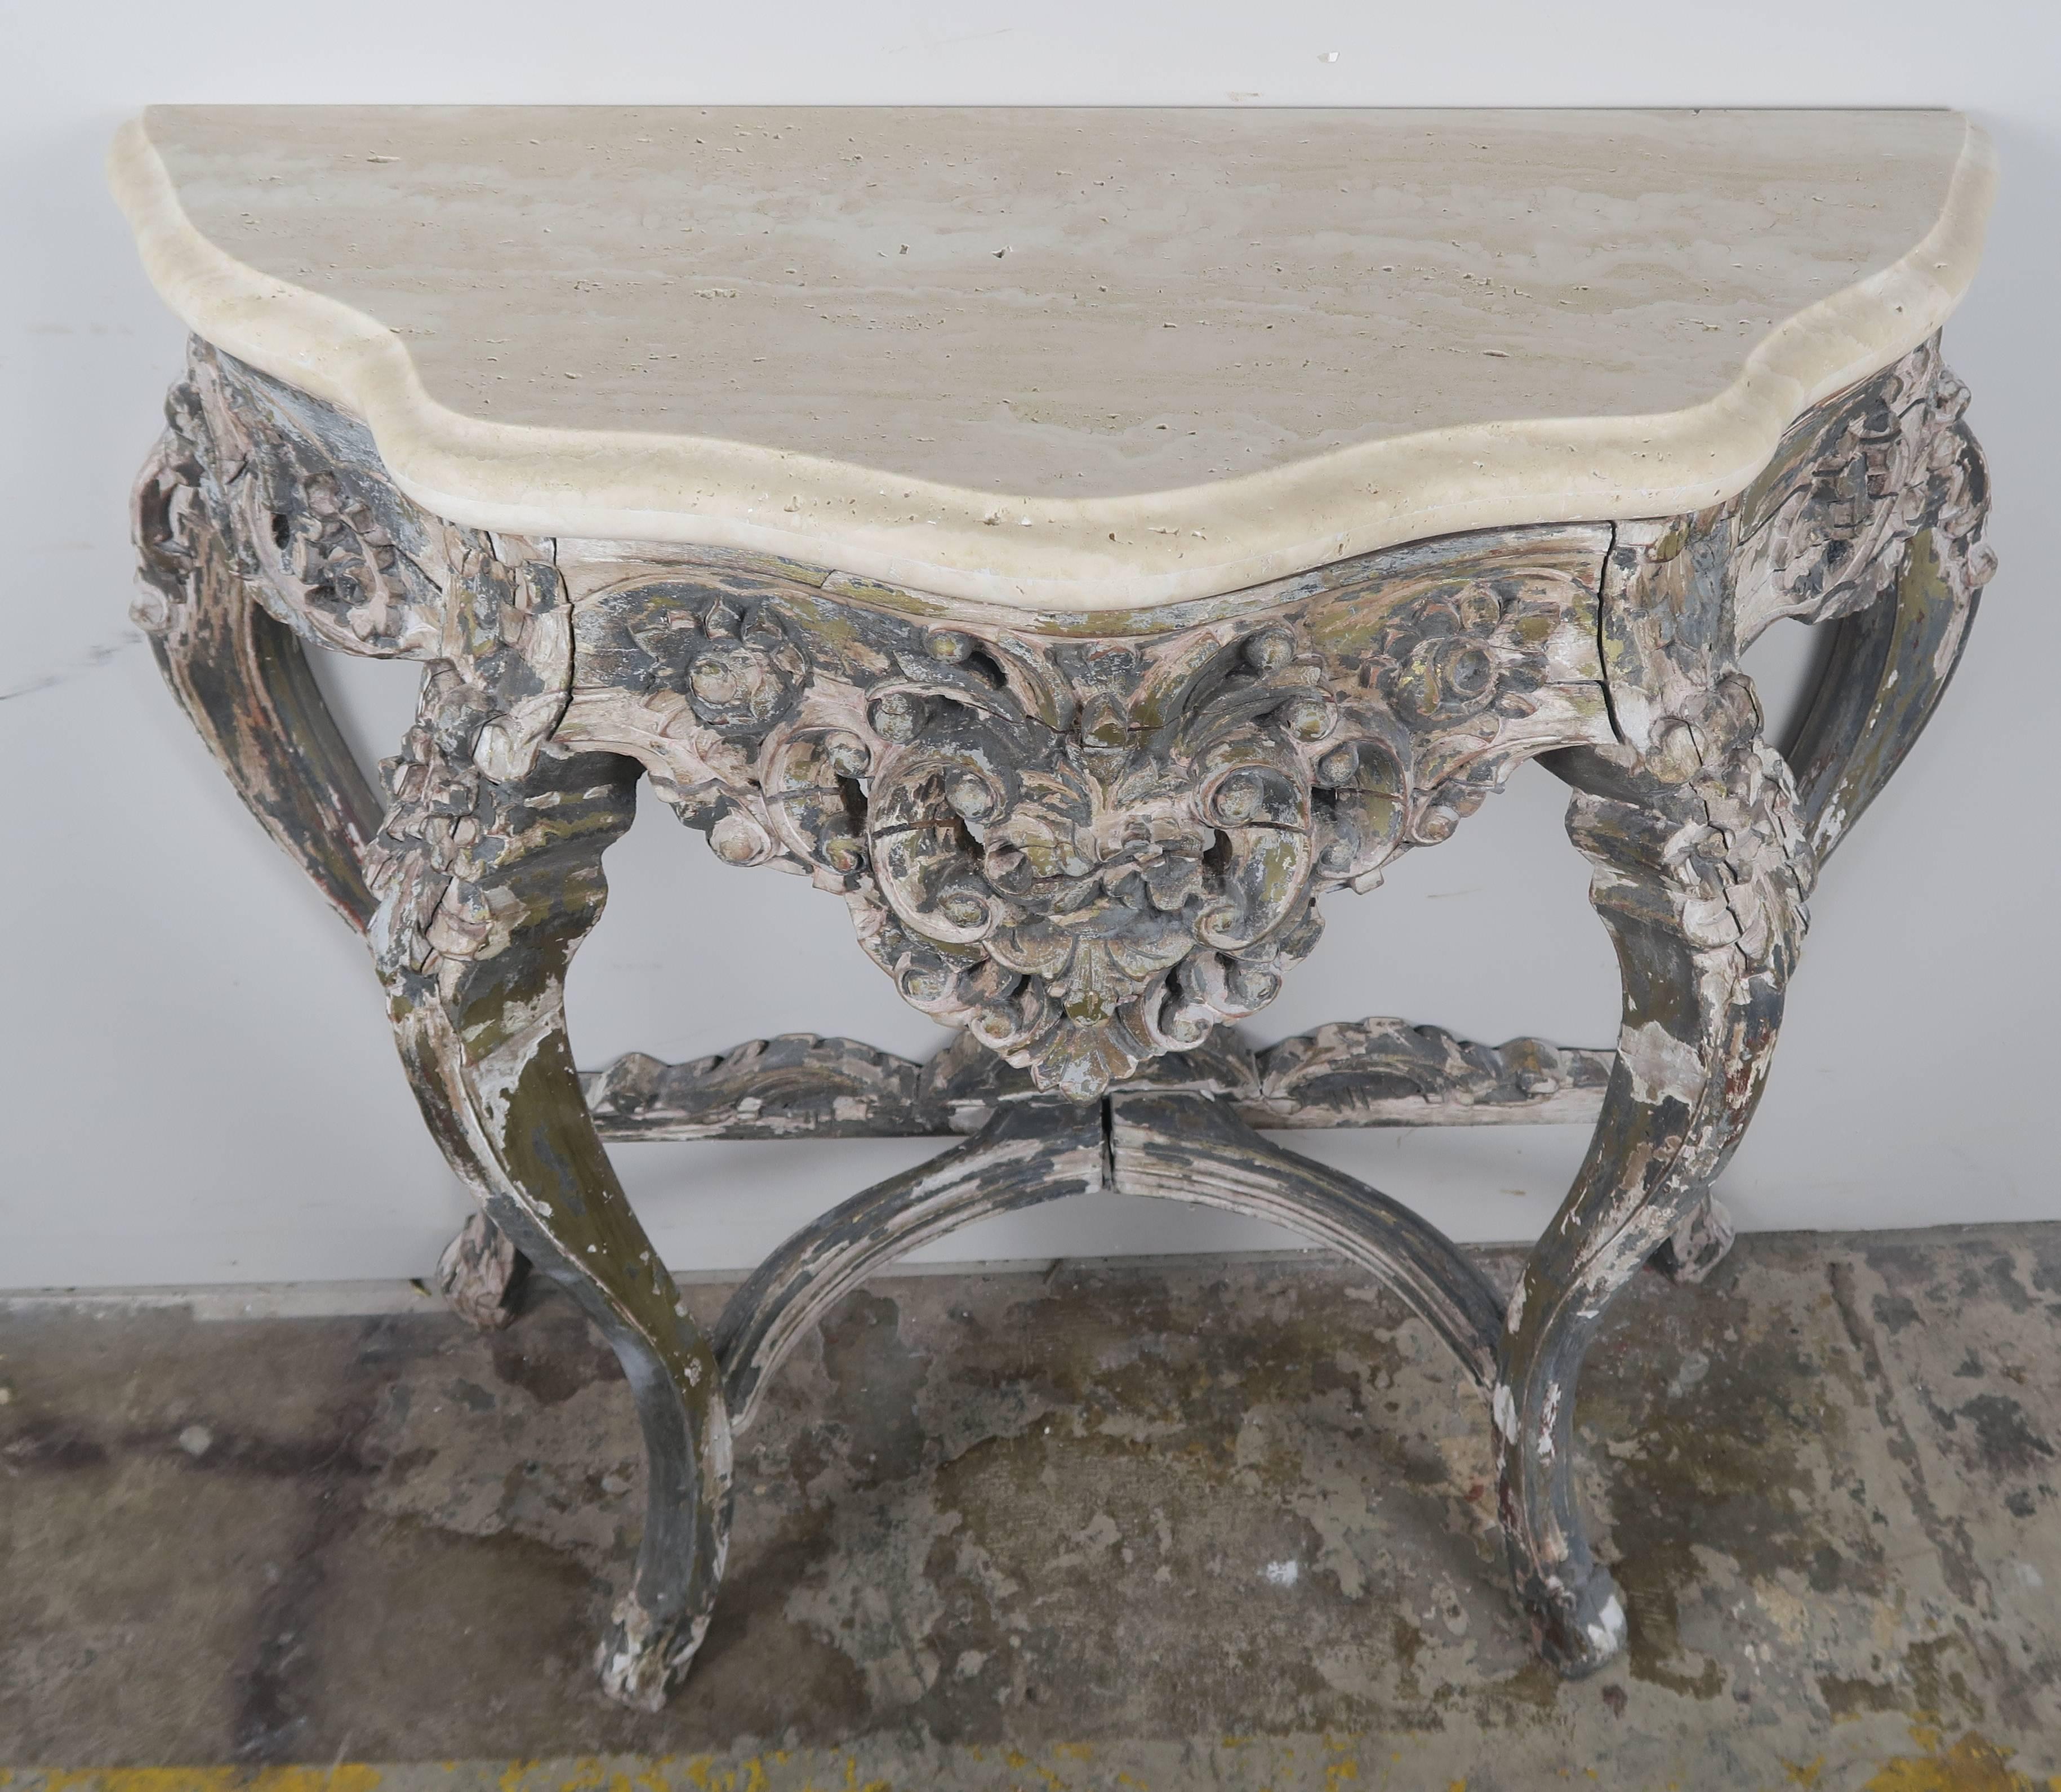 French painted carved Rococo style wood console standing on four cabriole legs that meet at centre finial. Distressed worn paint. Travertine top with an ogee-bullnose edge detail.